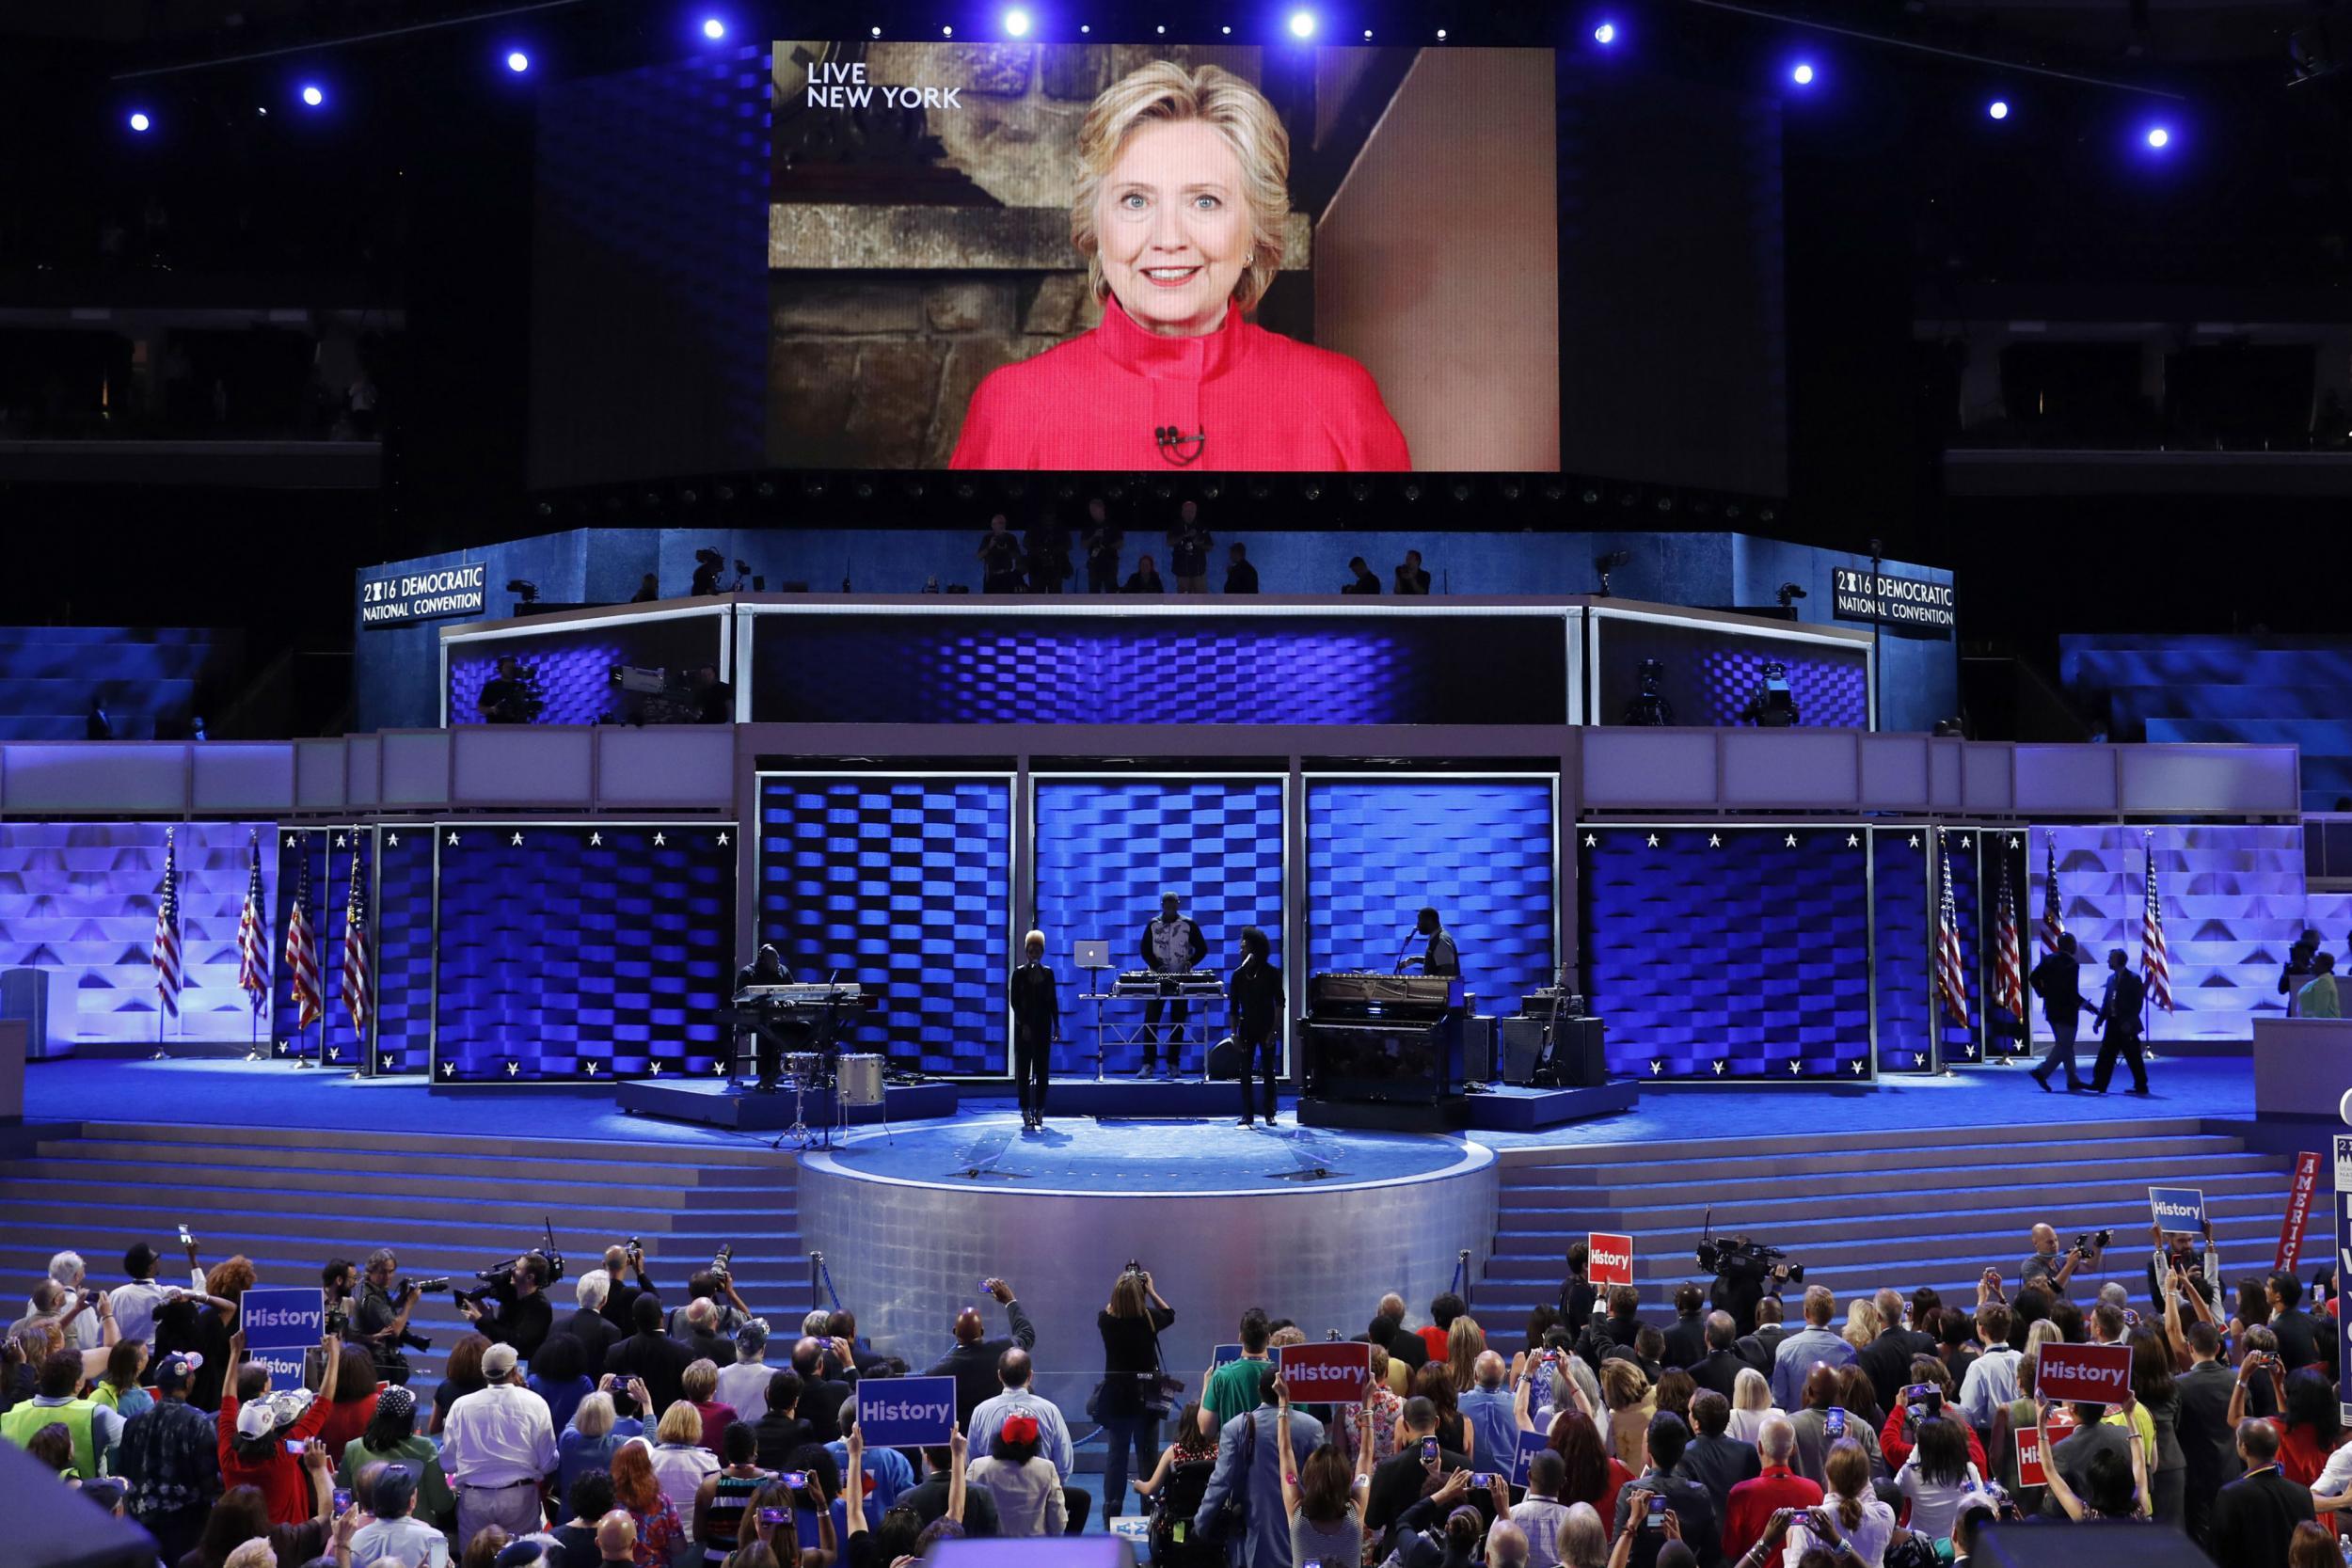 Hillary Clinton crashes the party by video link